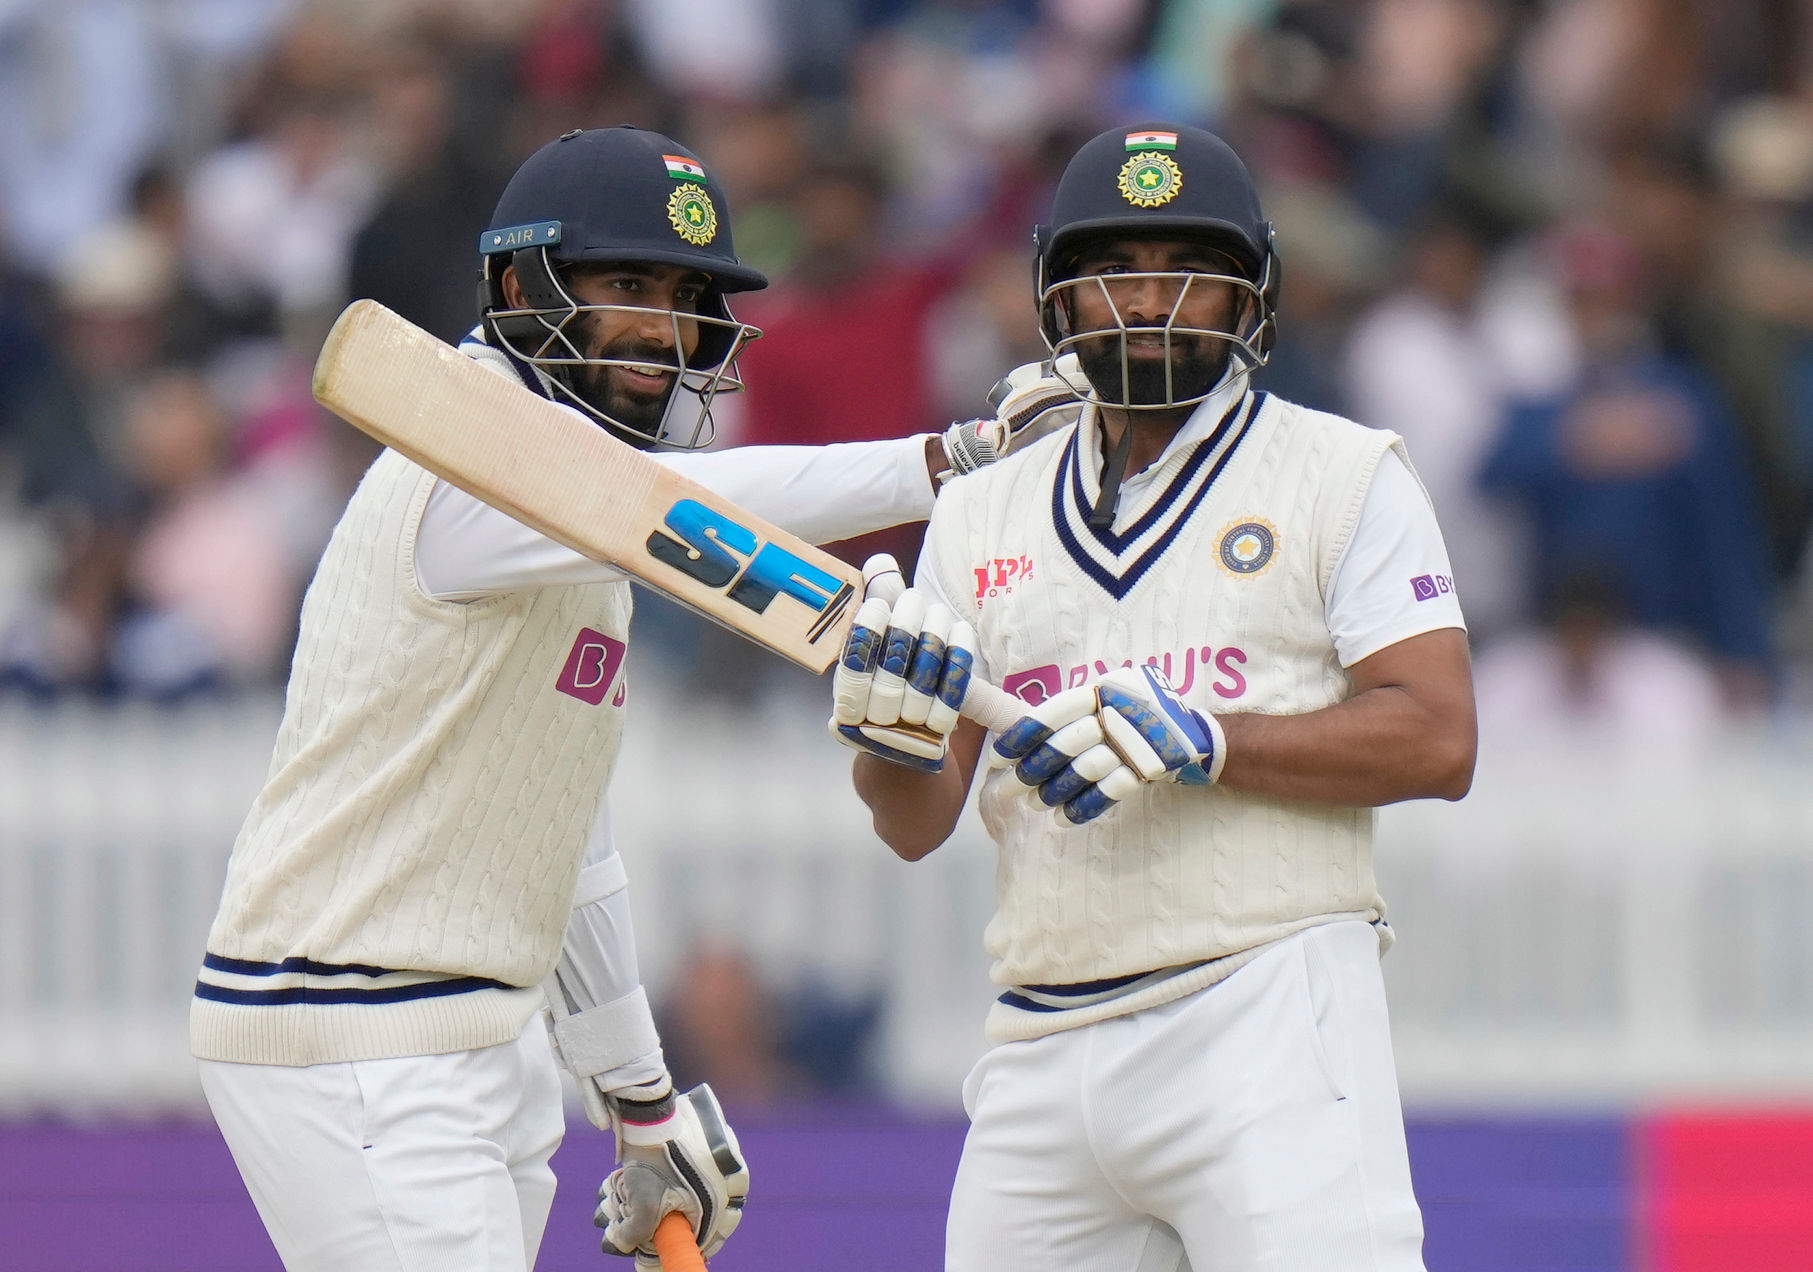 Shami, Bumrah record highest 9th-wicket partnership for India at Lord’s